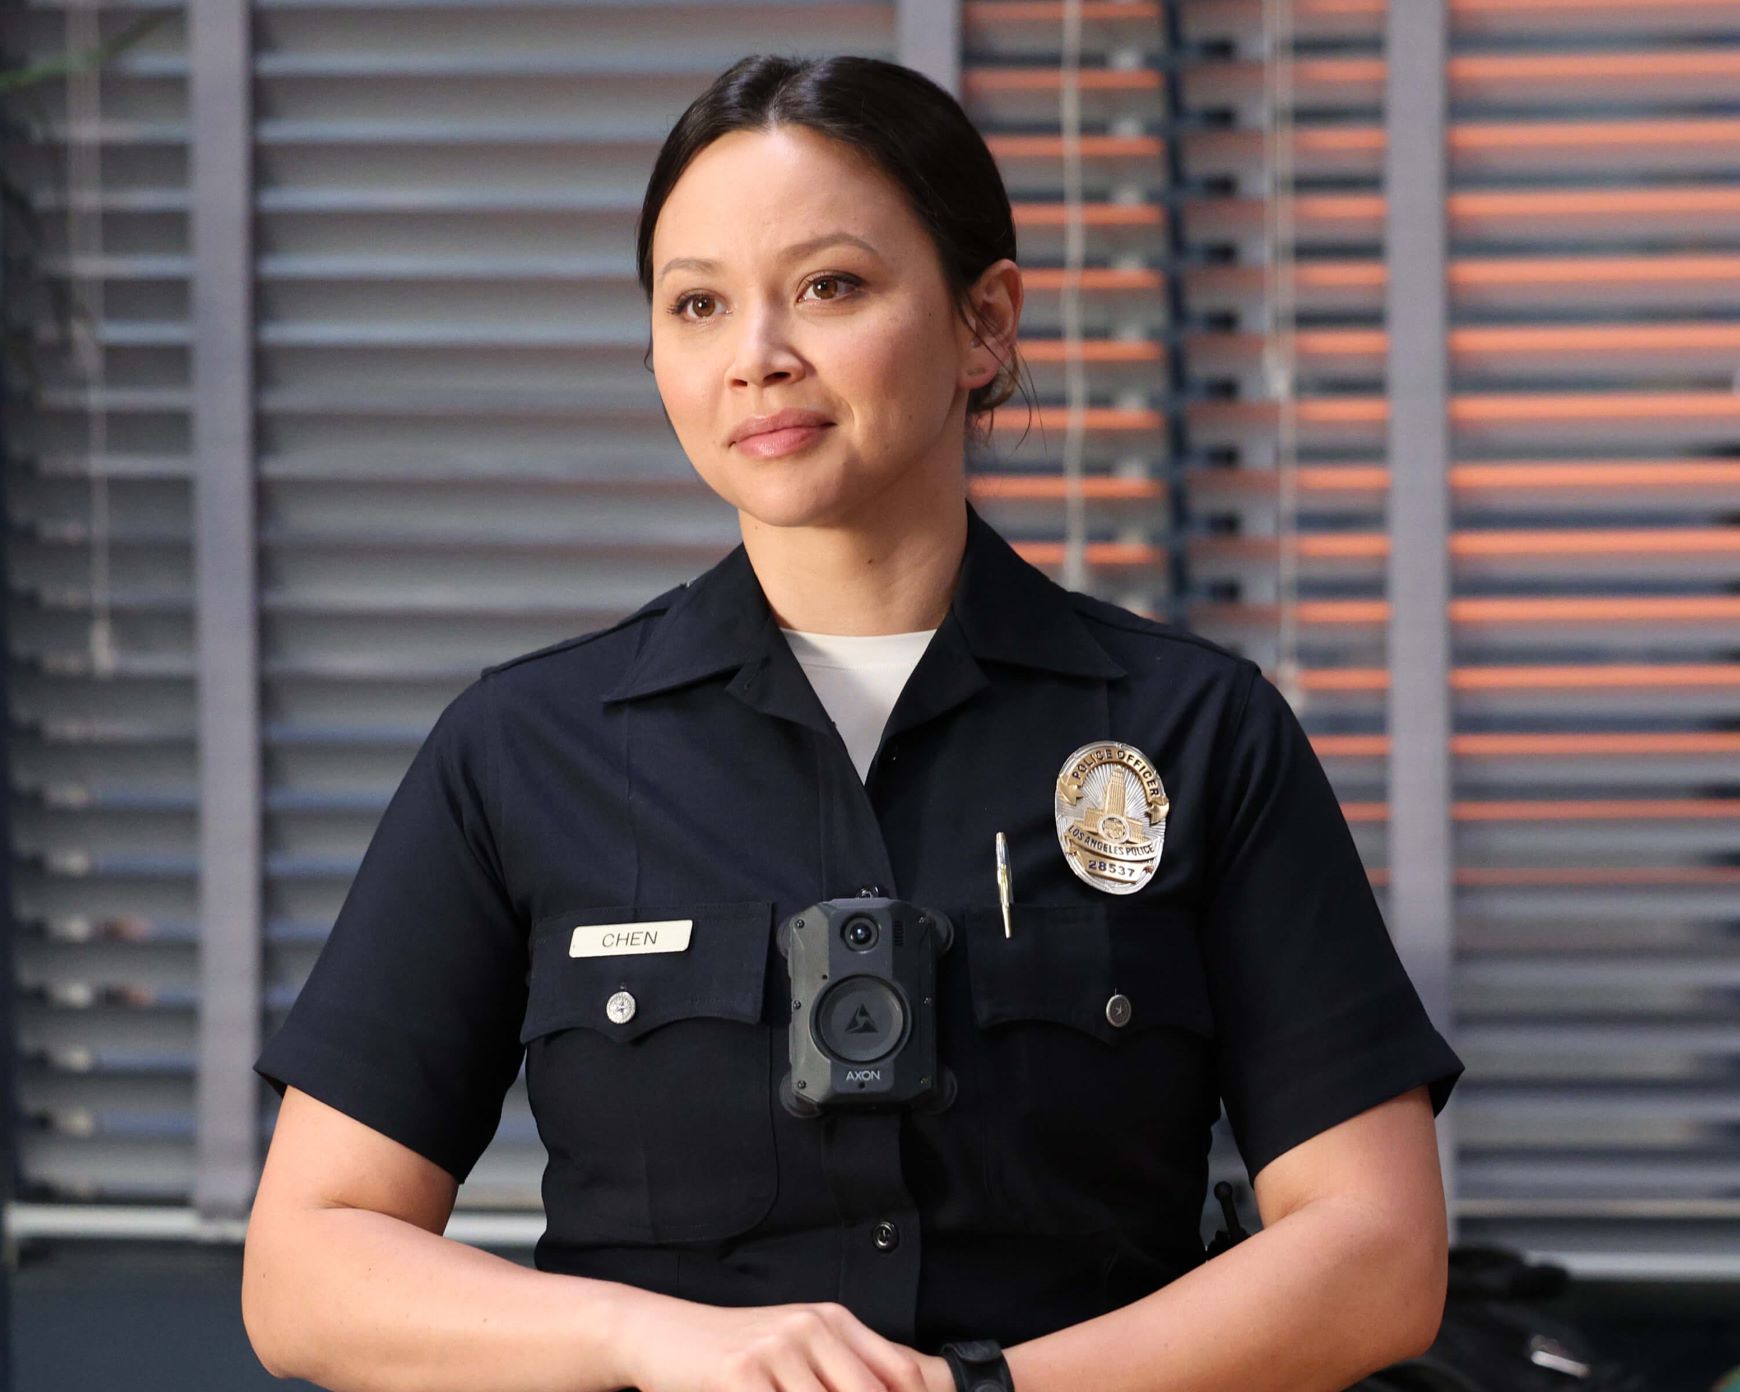 Melissa O'Neil, in character as Lucy Chen in 'The Rookie' Season 5, wears her dark blue police uniform.